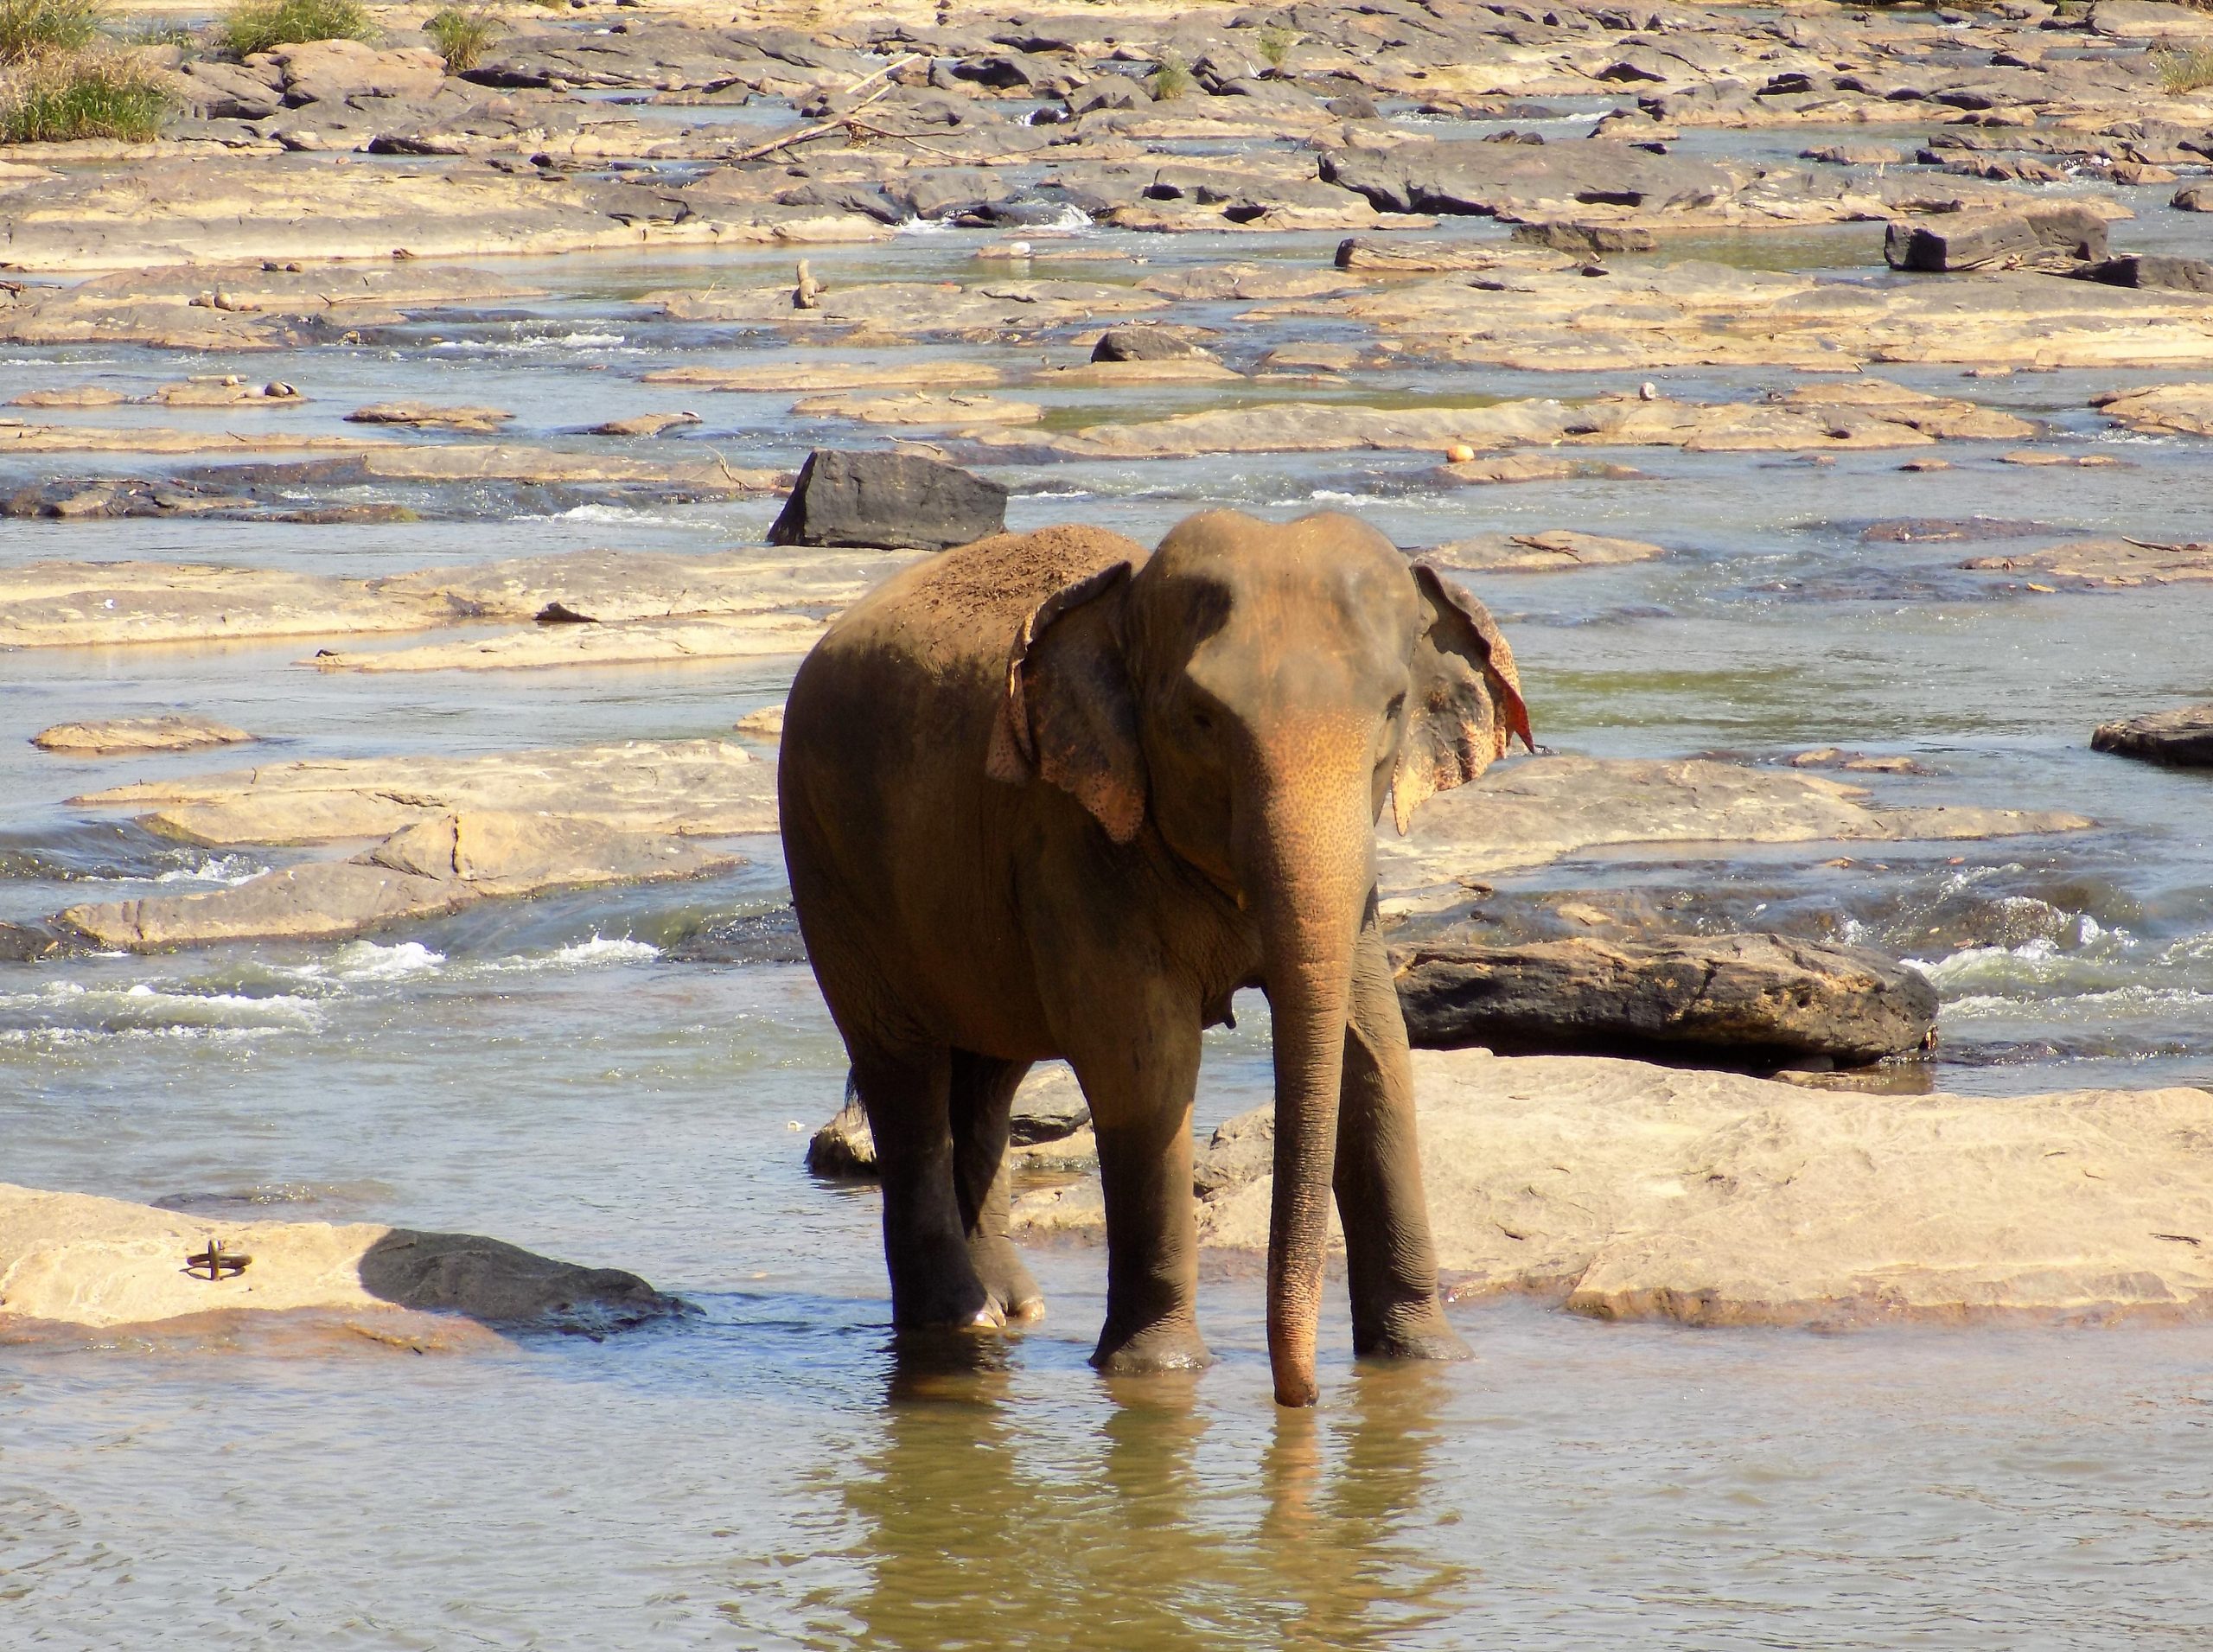 Elephant in the River